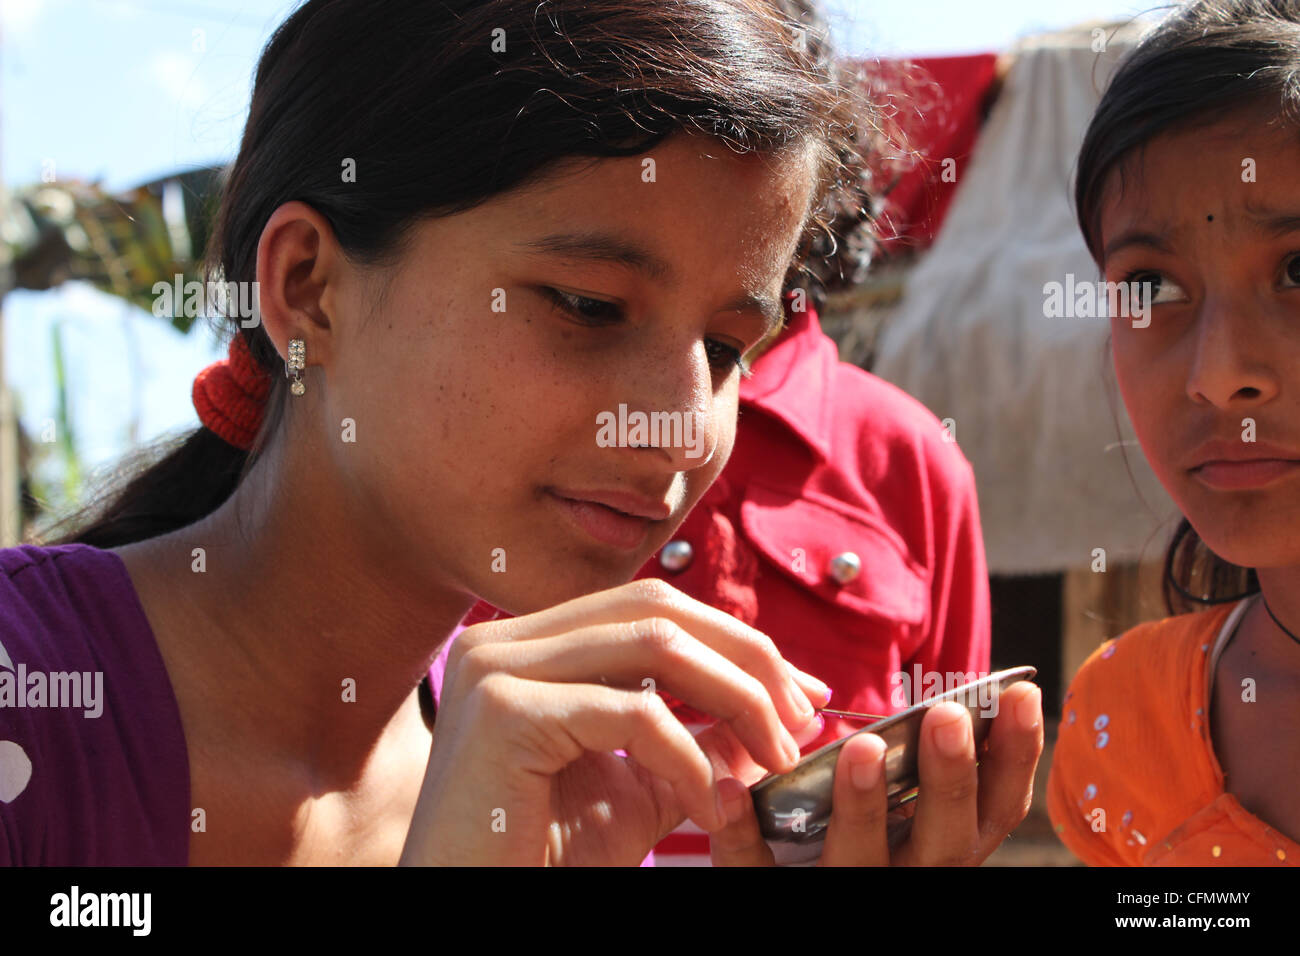 a girl getting ready to put tika on her brother's forehead during Bhai tika, the fifth day of Tihar festival, Nepal Stock Photo